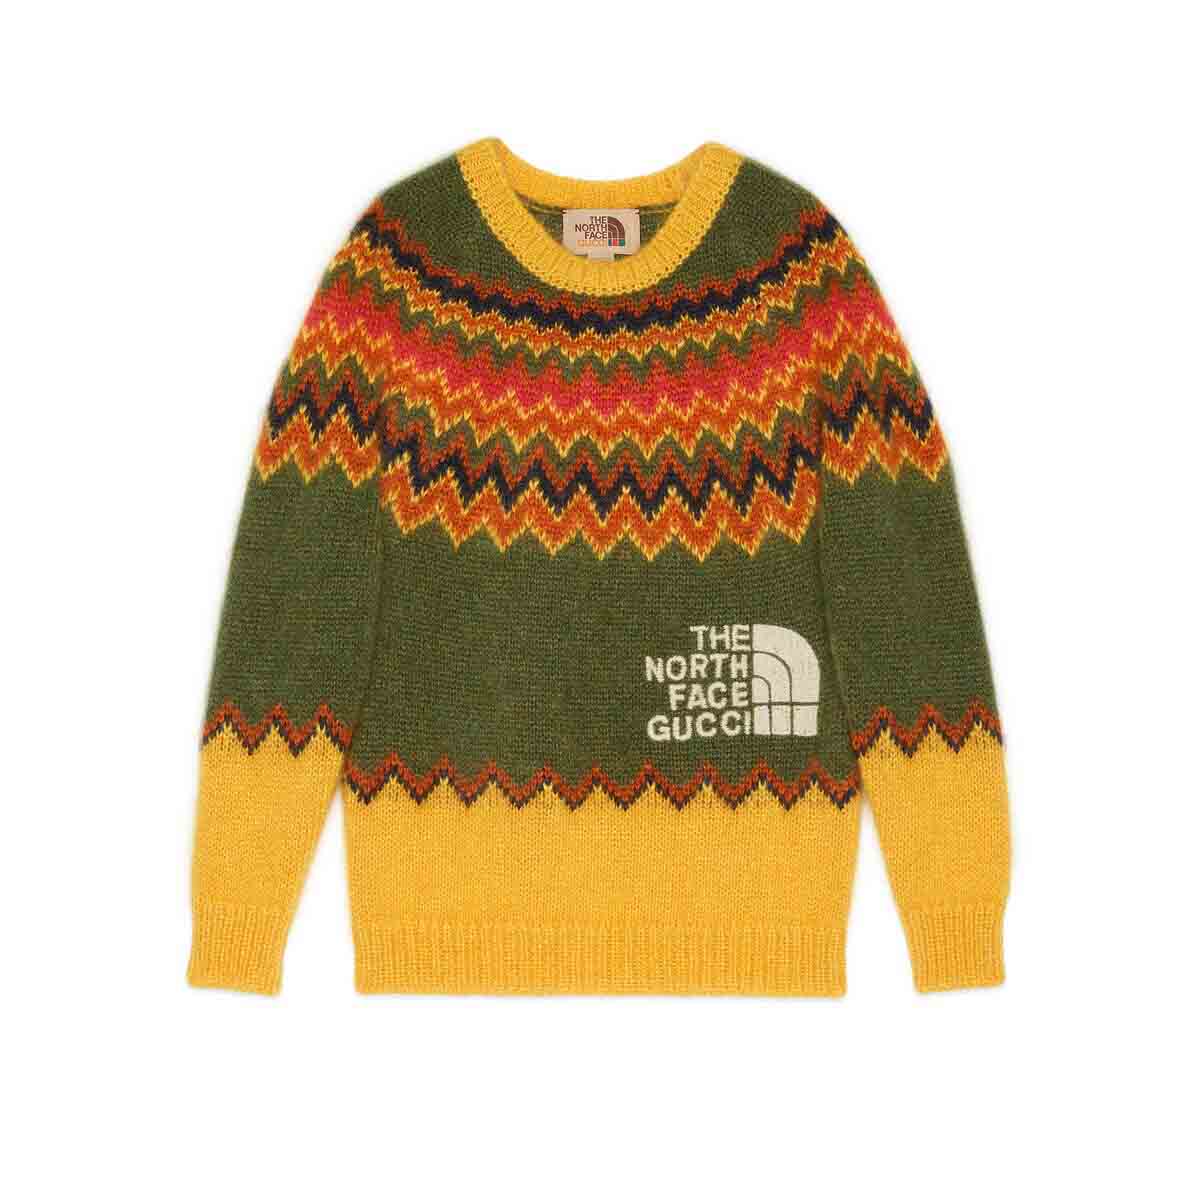 Gucci x The North Face Sweater Yellow/Green - FW21 - US